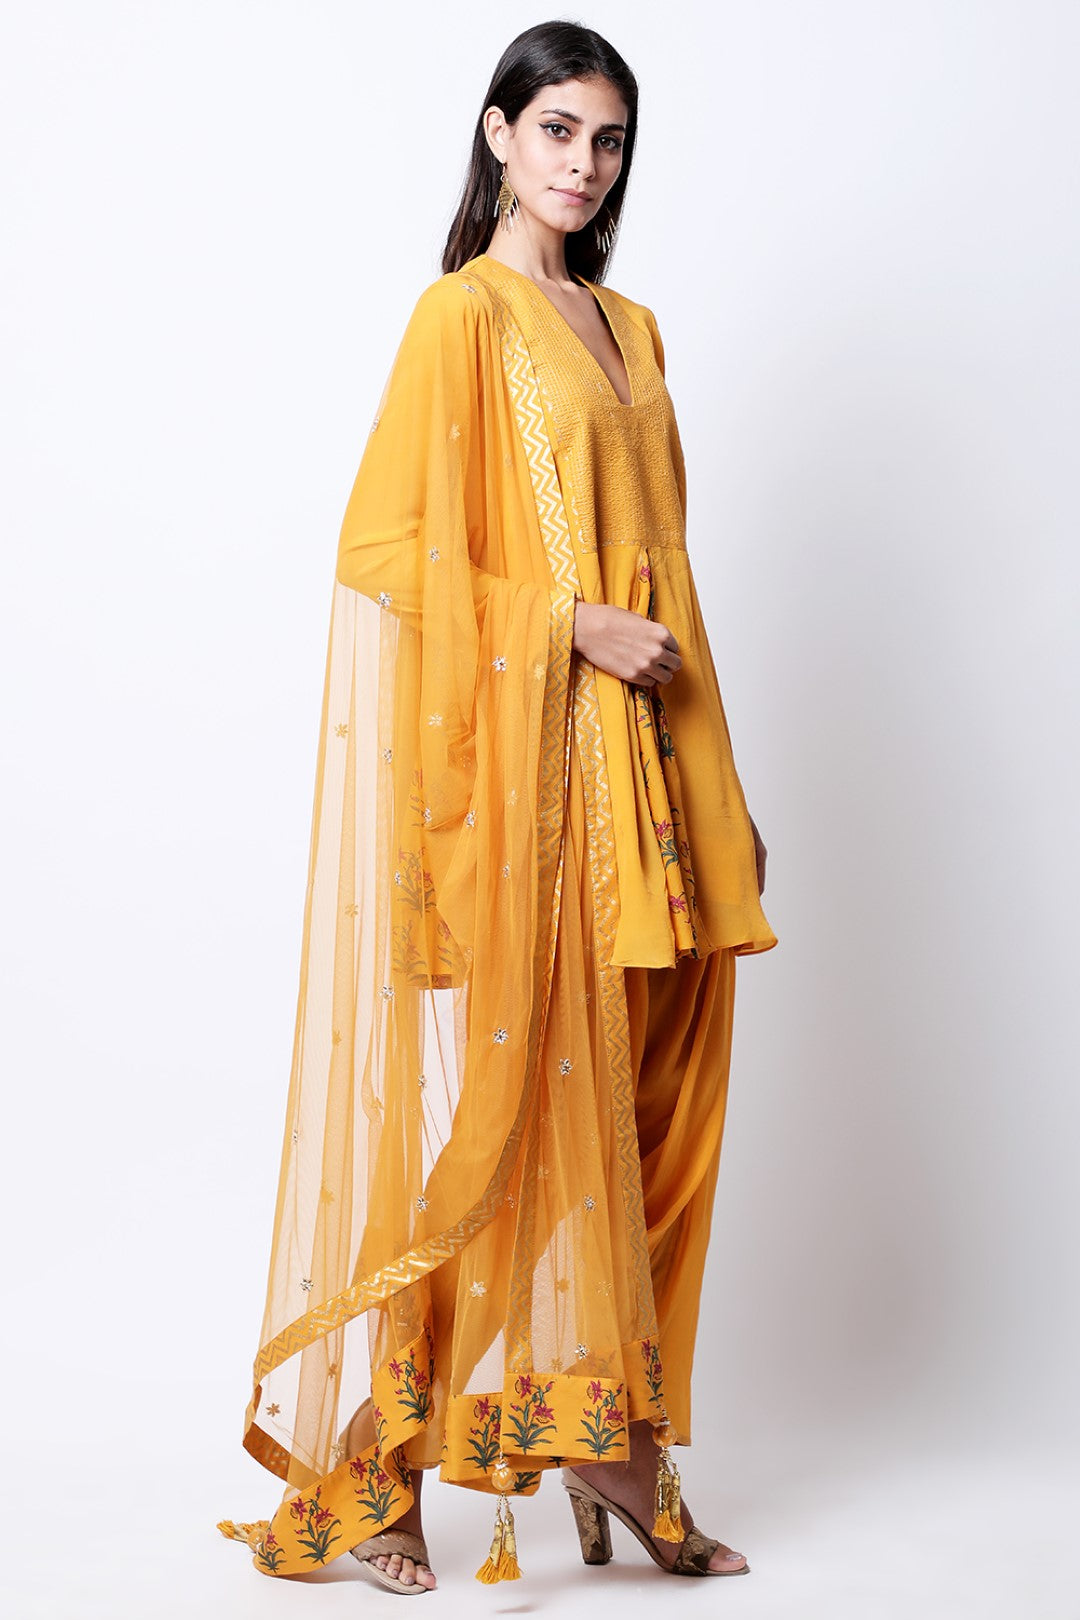 Ochre hand printed front and side godets kurta with mukesh embroidered dupatta and cowl dhoti.